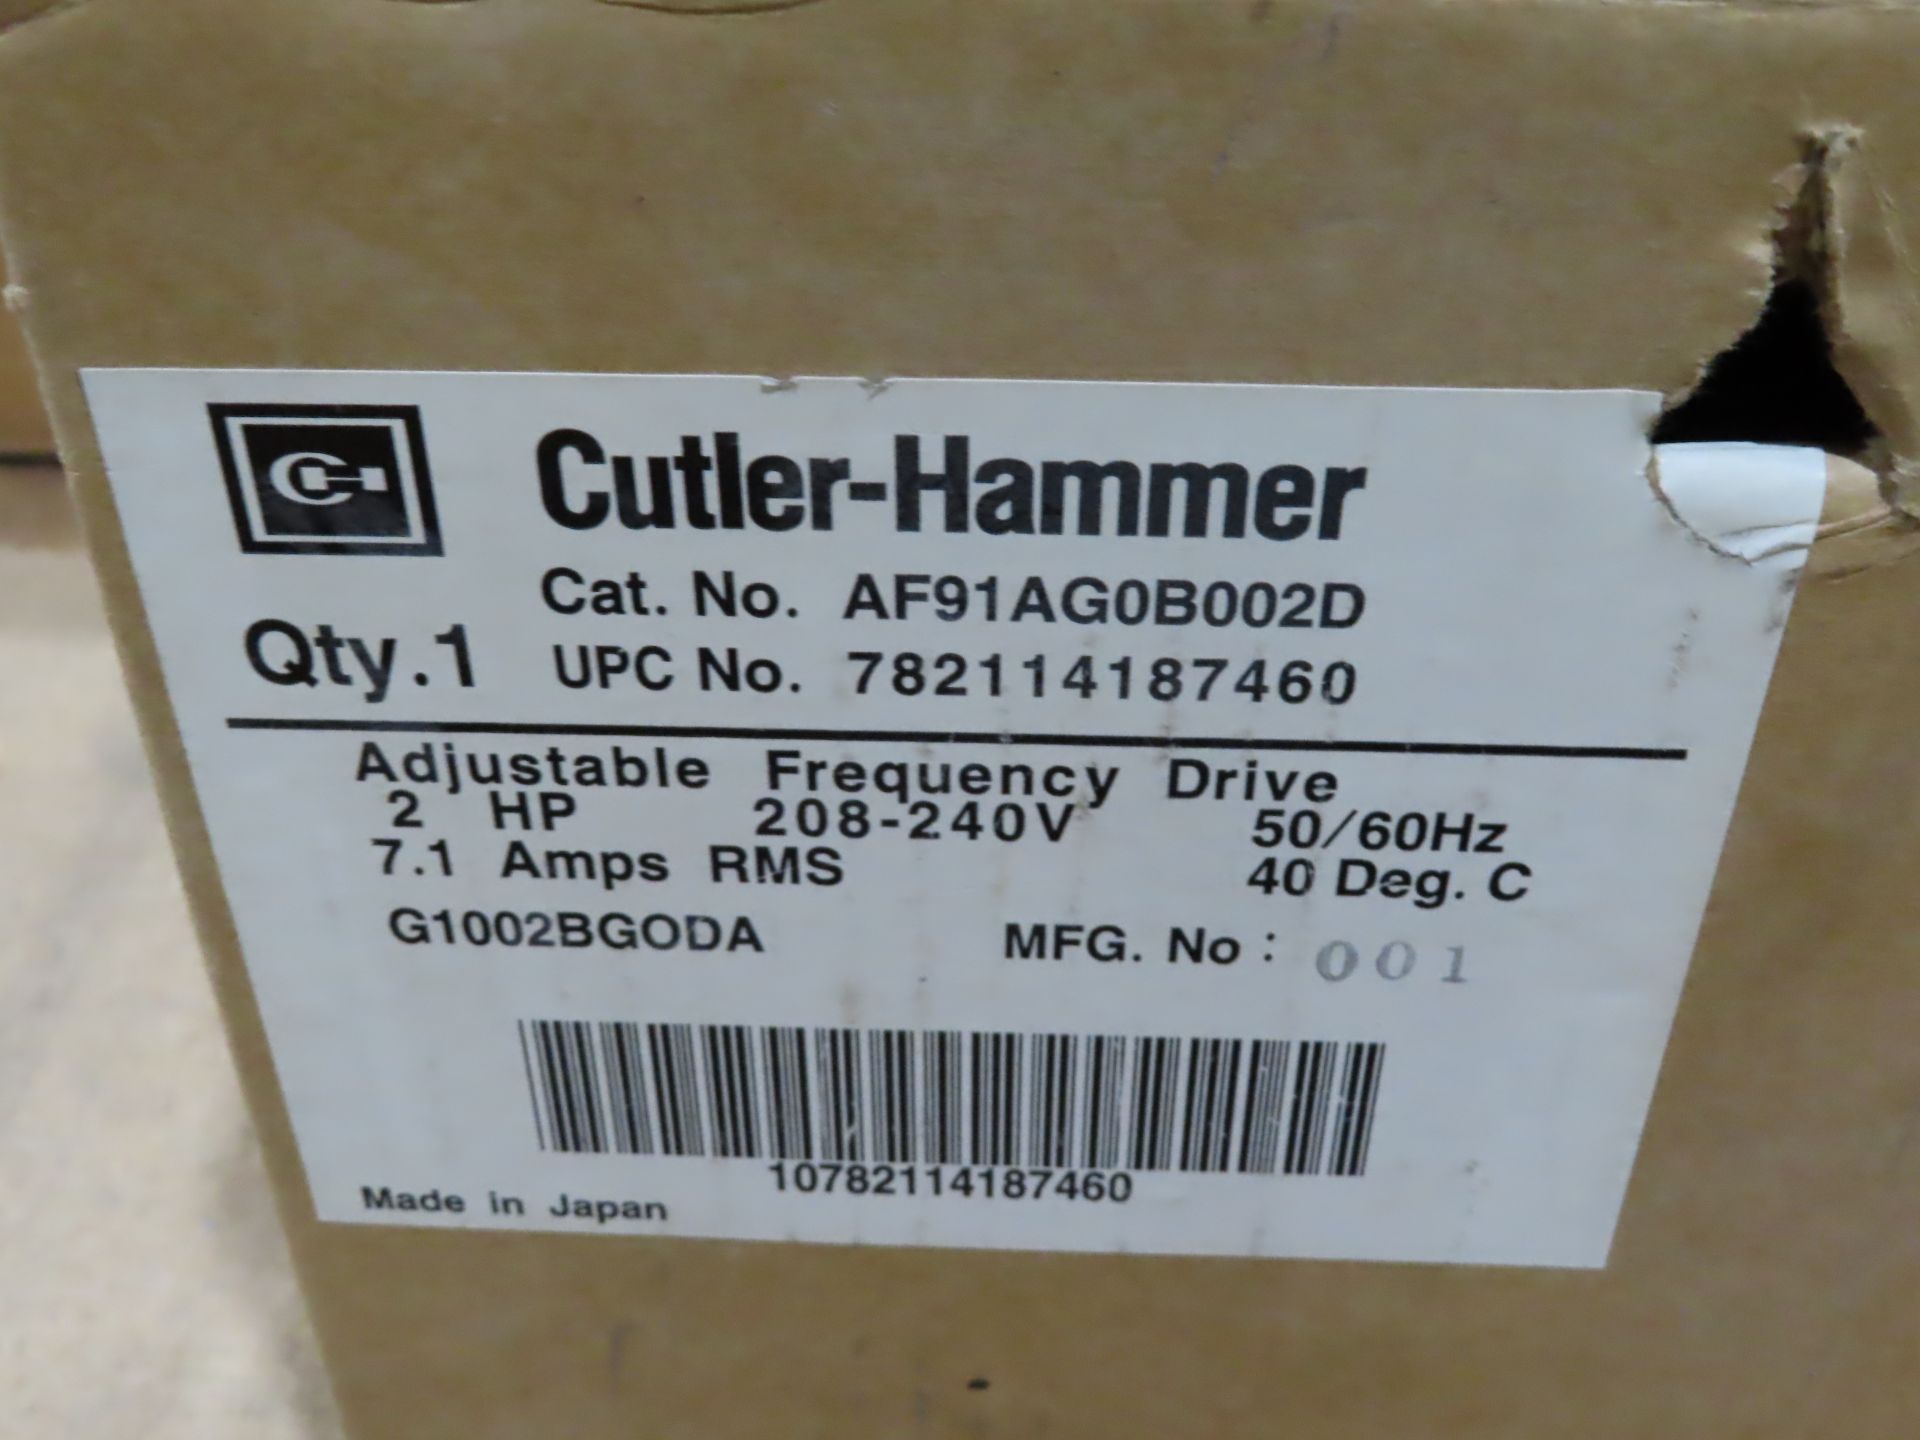 Cutler Hammer model AF91AG0B002D, in box and appears new but box is marked as "has been tested", - Image 2 of 2